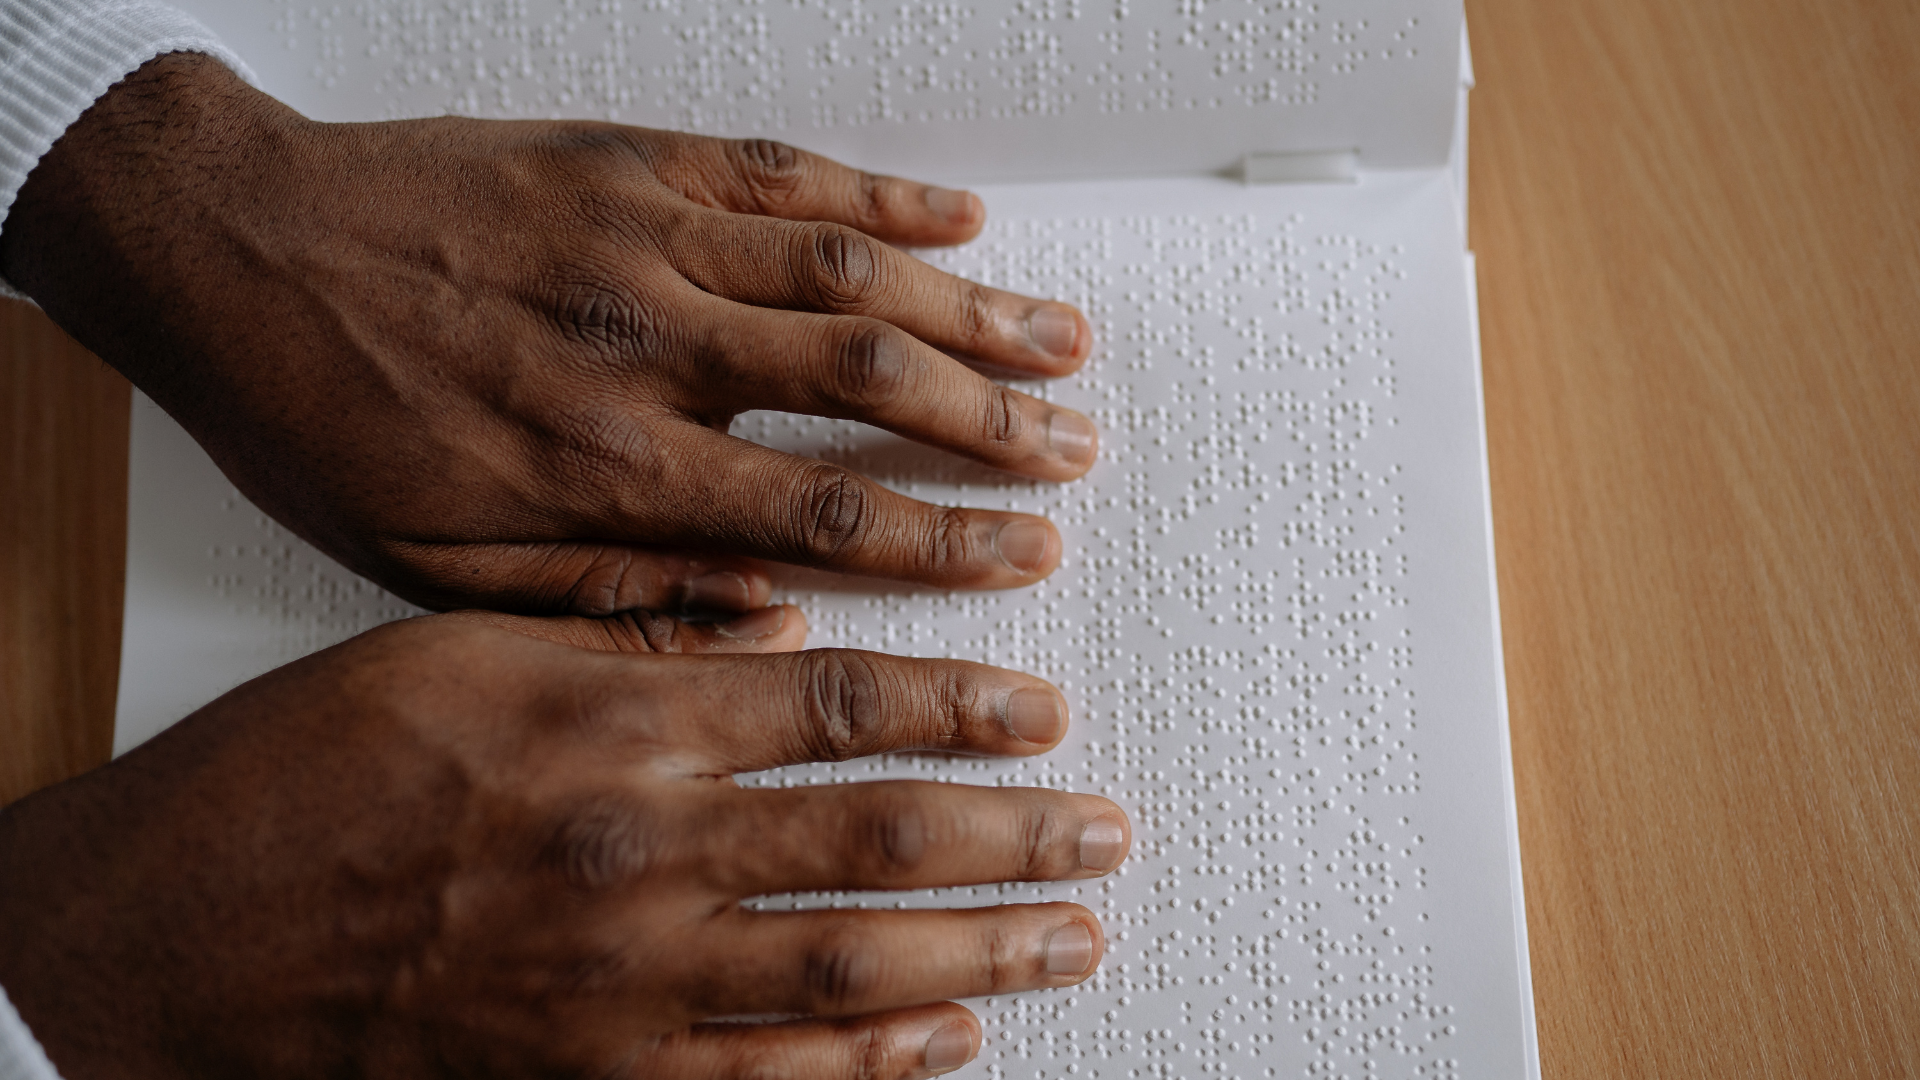 Image of a blind student reading braille.